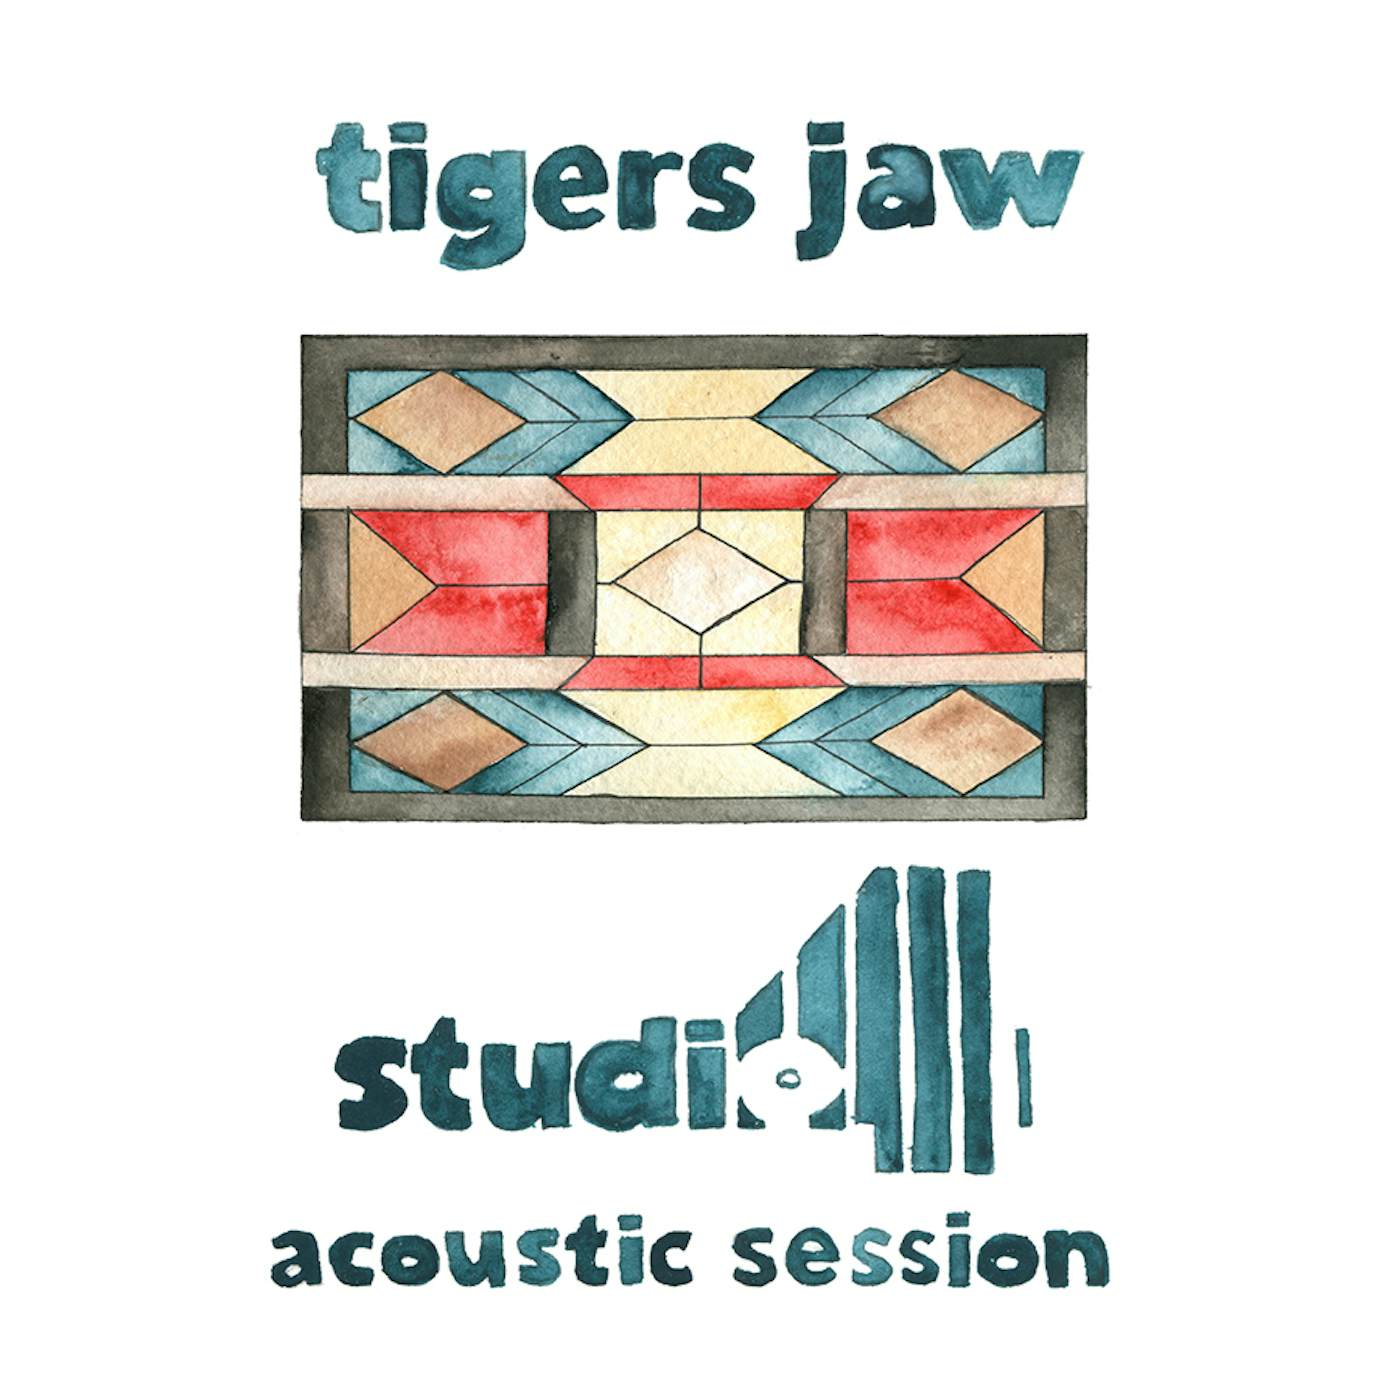 Tigers Jaw Studio 4 Acoustic Session Vinyl Record